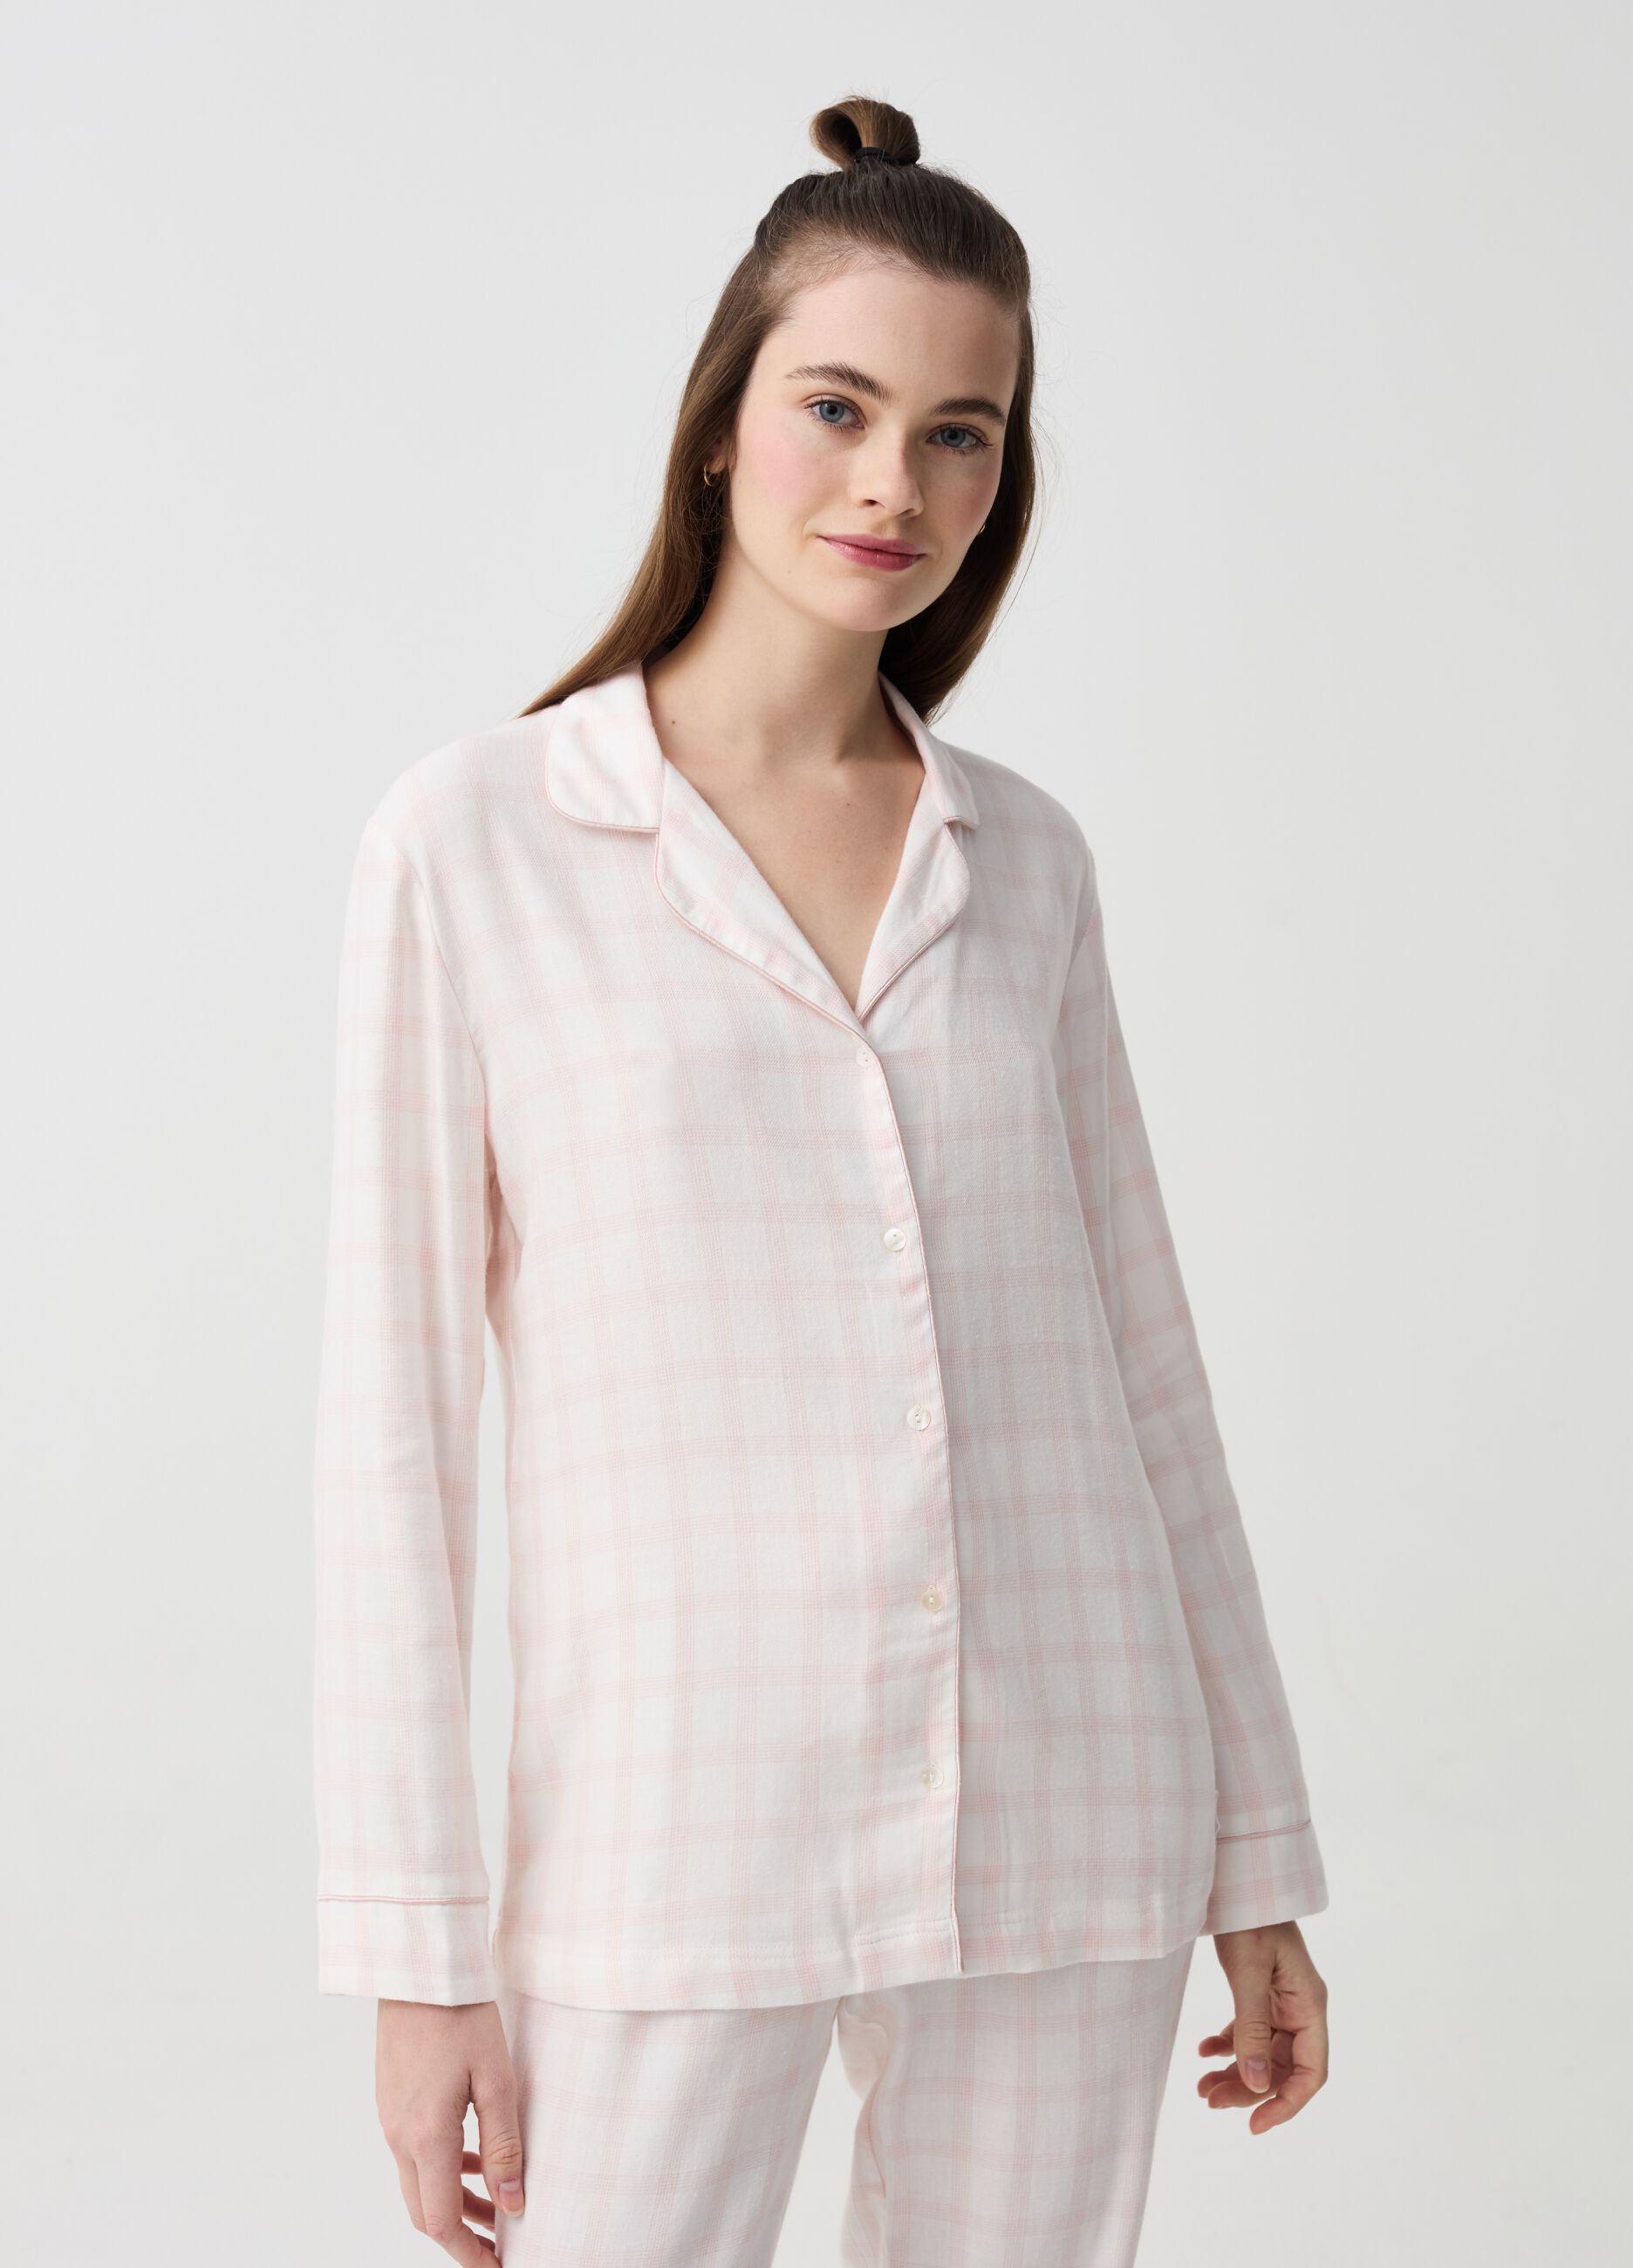 Flannel pyjamas with check pattern